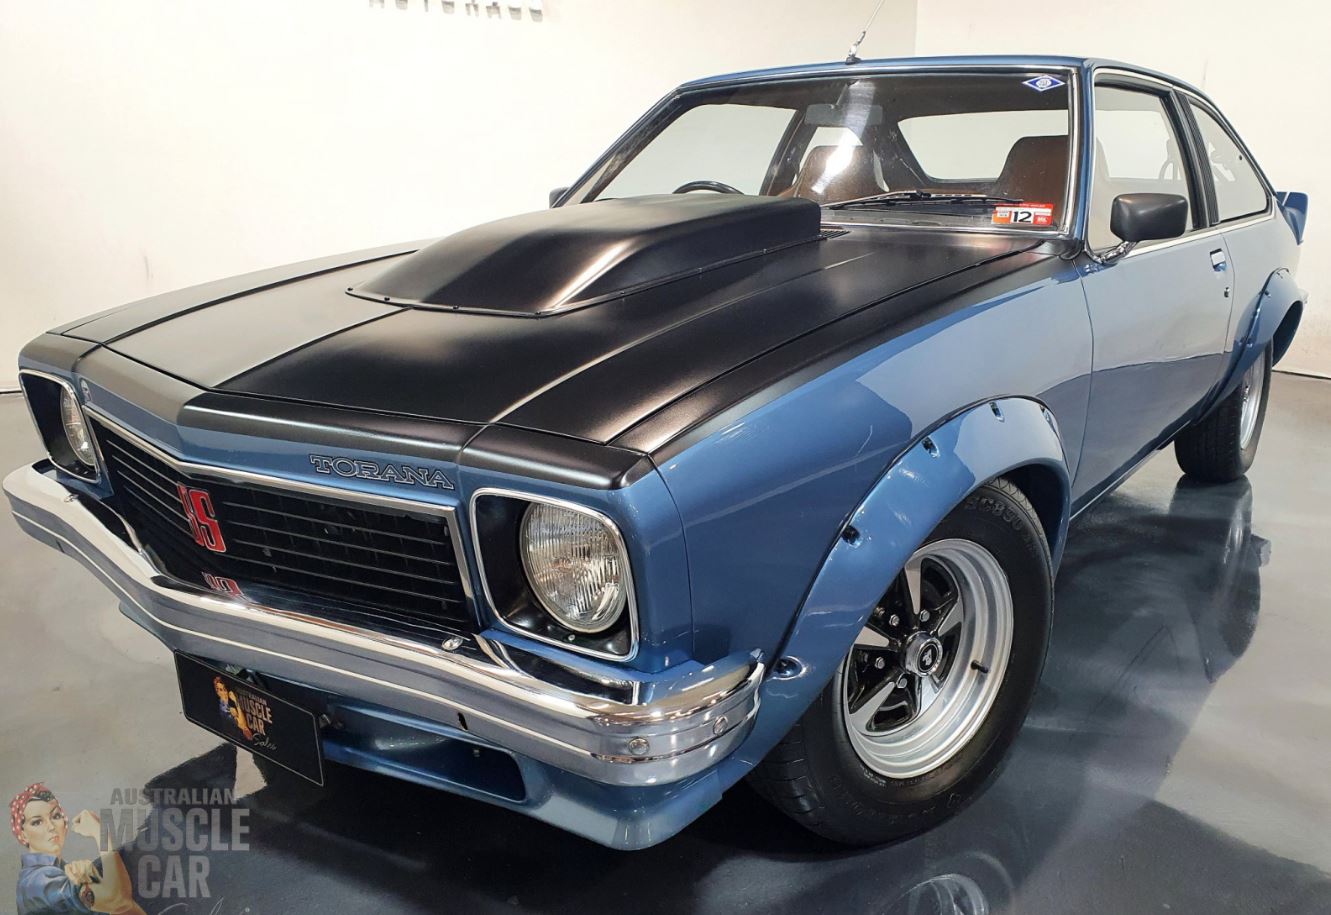 a-dose-of-pure-australian-muscle-a-rare-and-very-famous-1977-holden-torana-a9x-144300_1.jpg